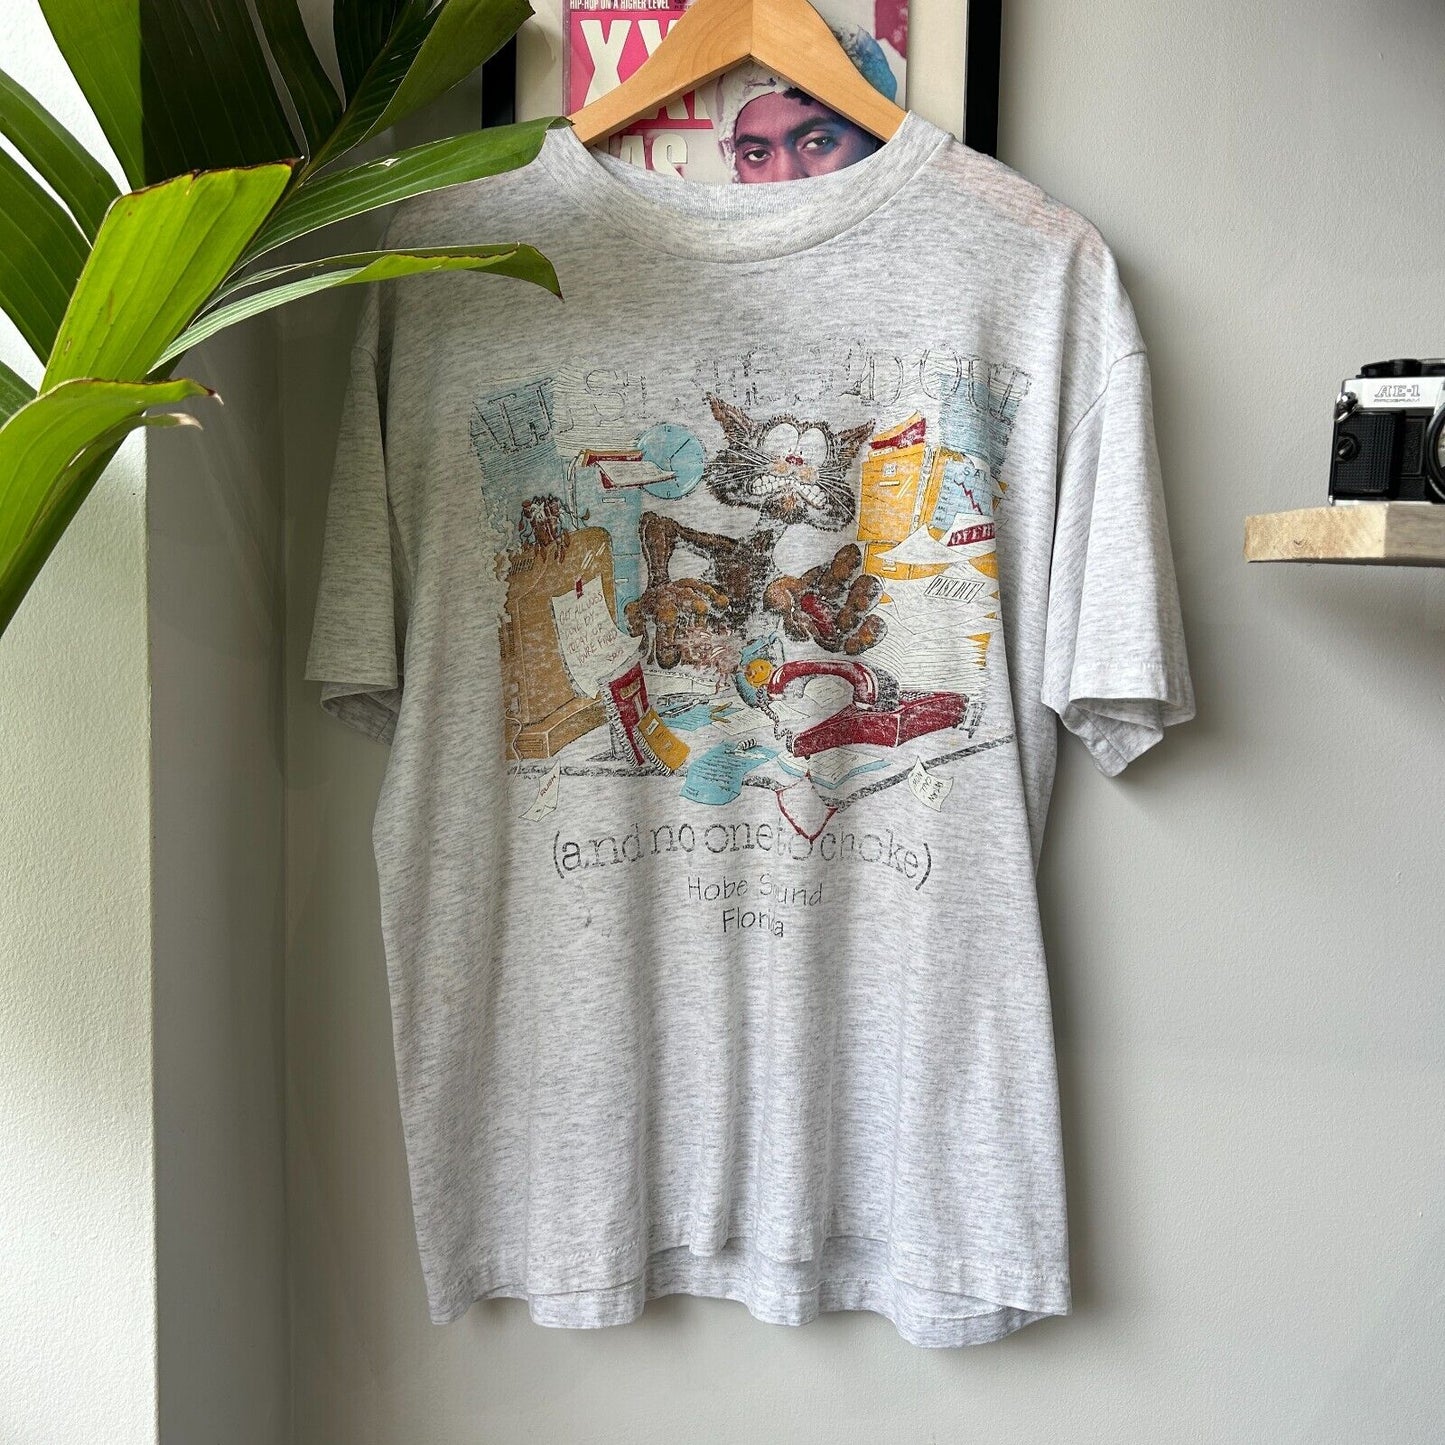 VINTAGE 90s | All Stressed Out & No One To Choke! Cat T-Shirt sz L Adult